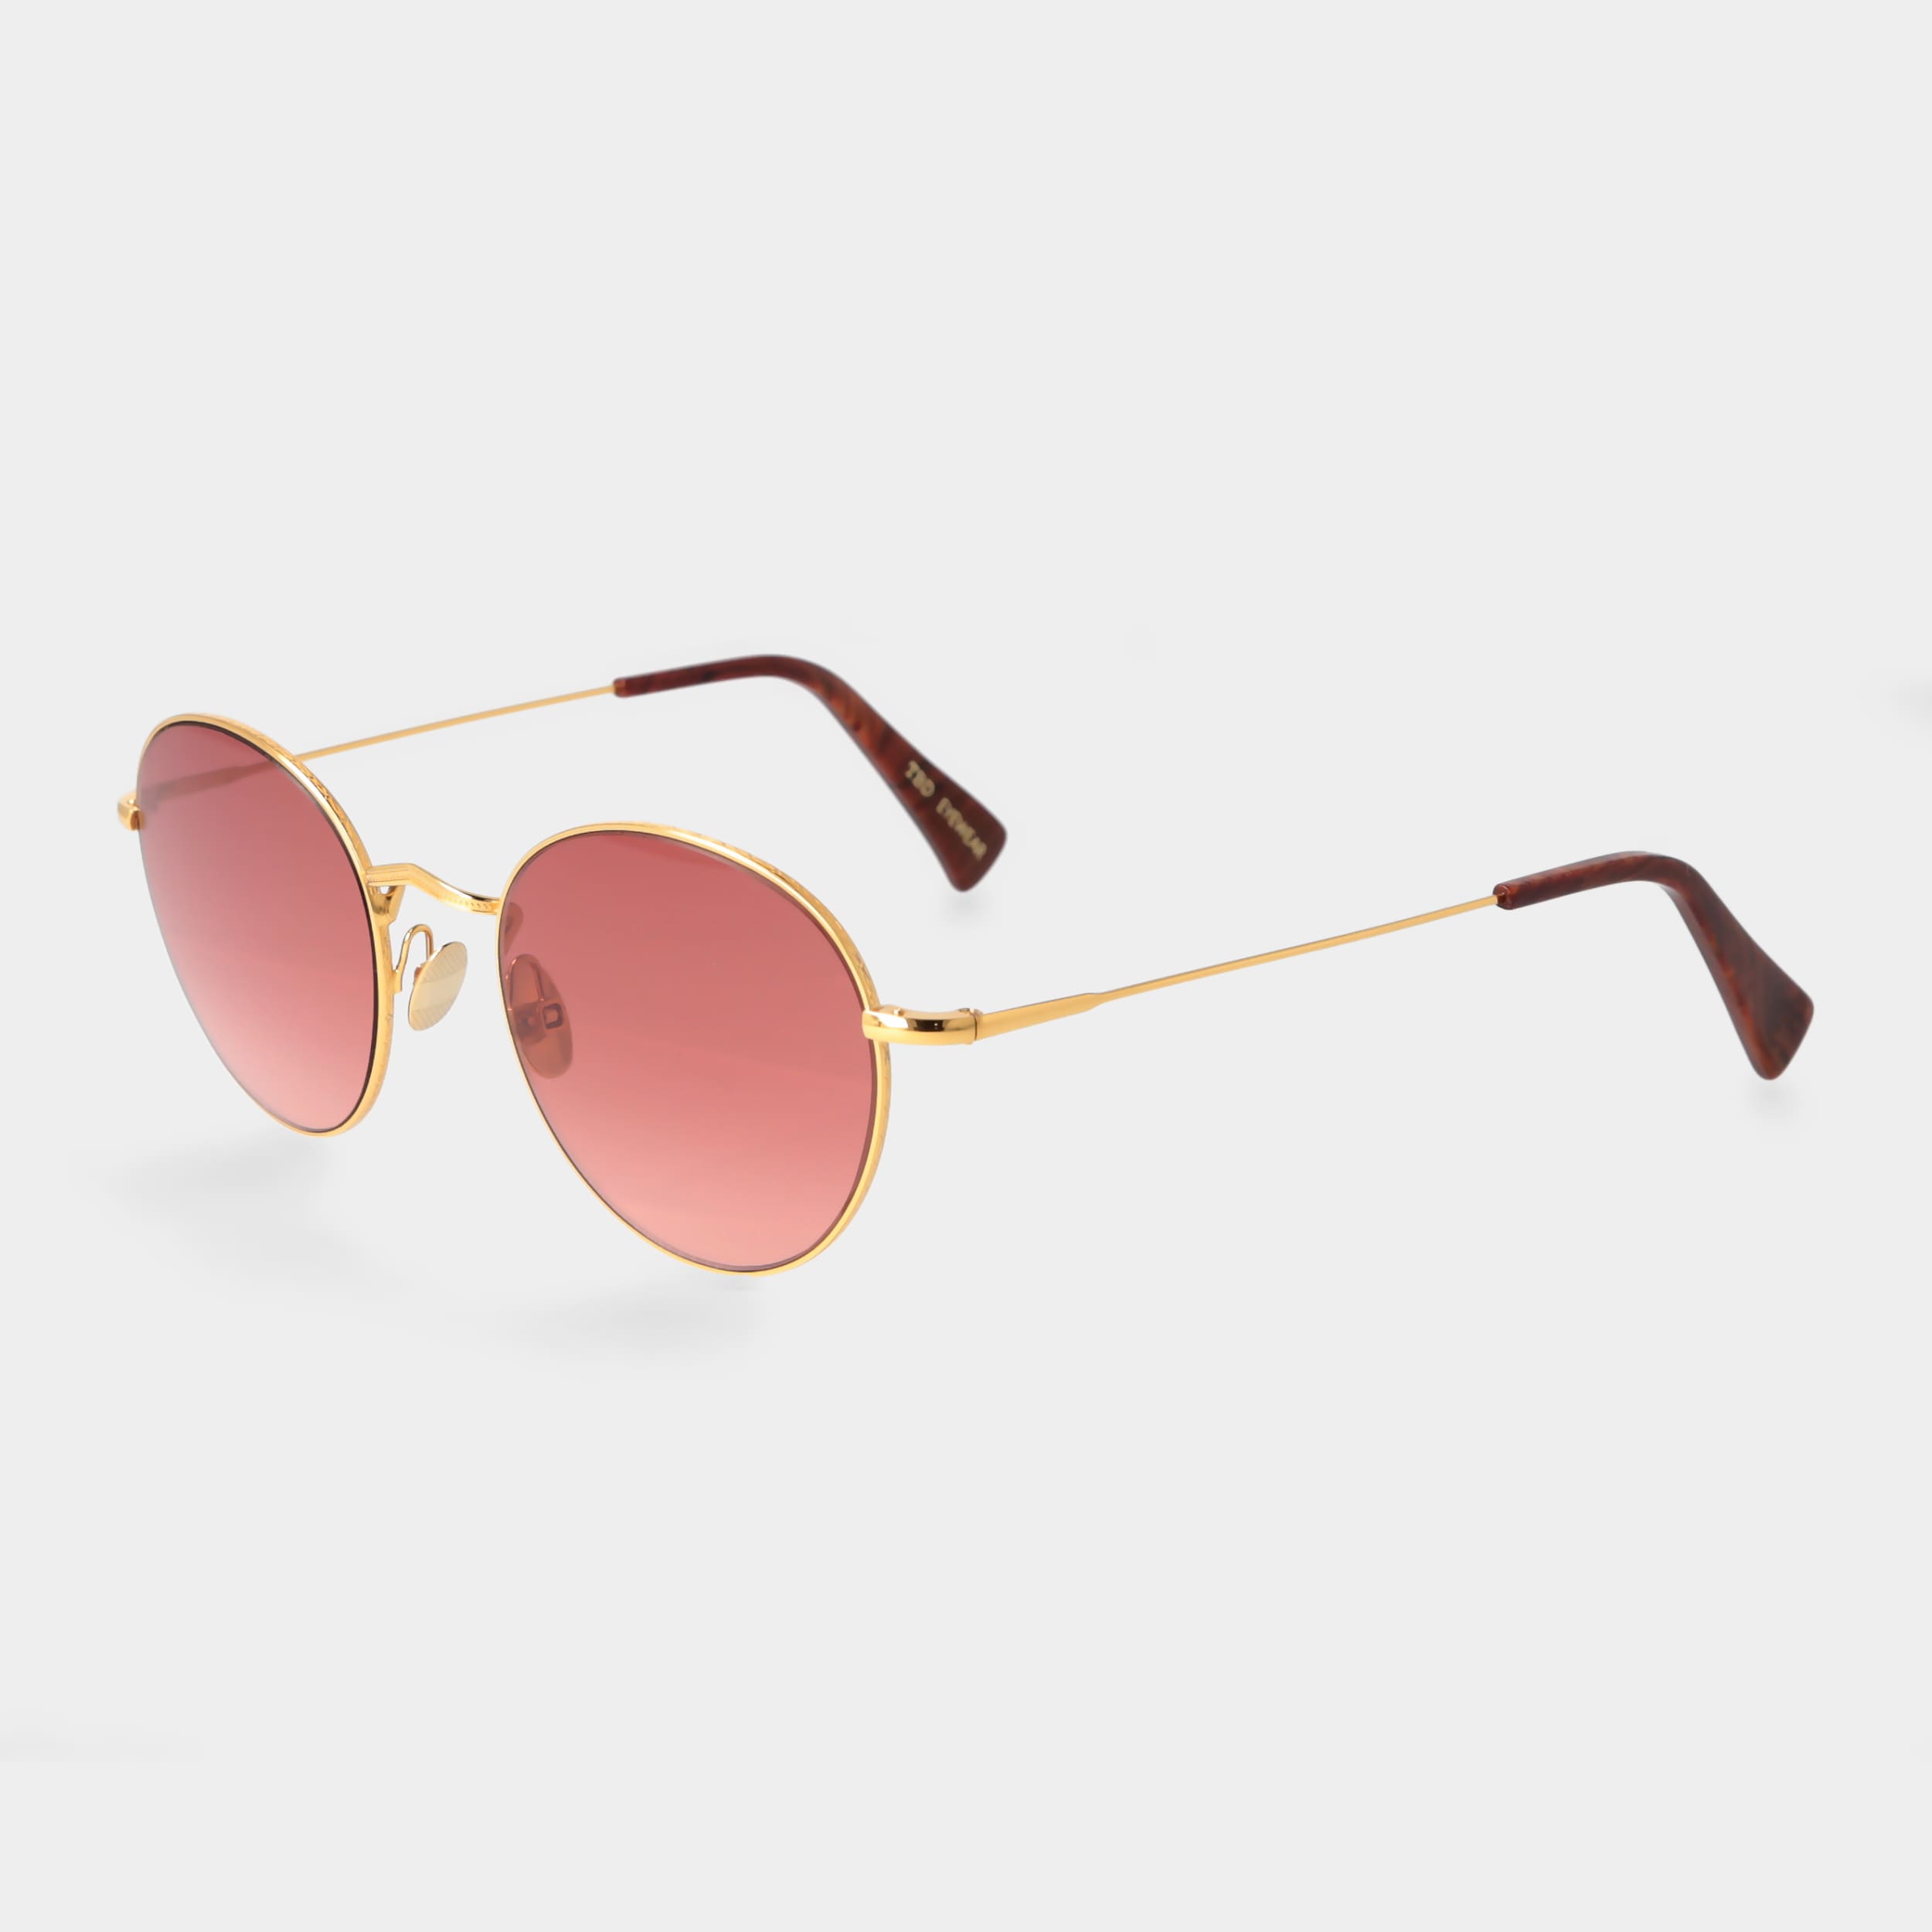 sunglasses-vicuna-gold-gradient-red-tbd-eyewear-total